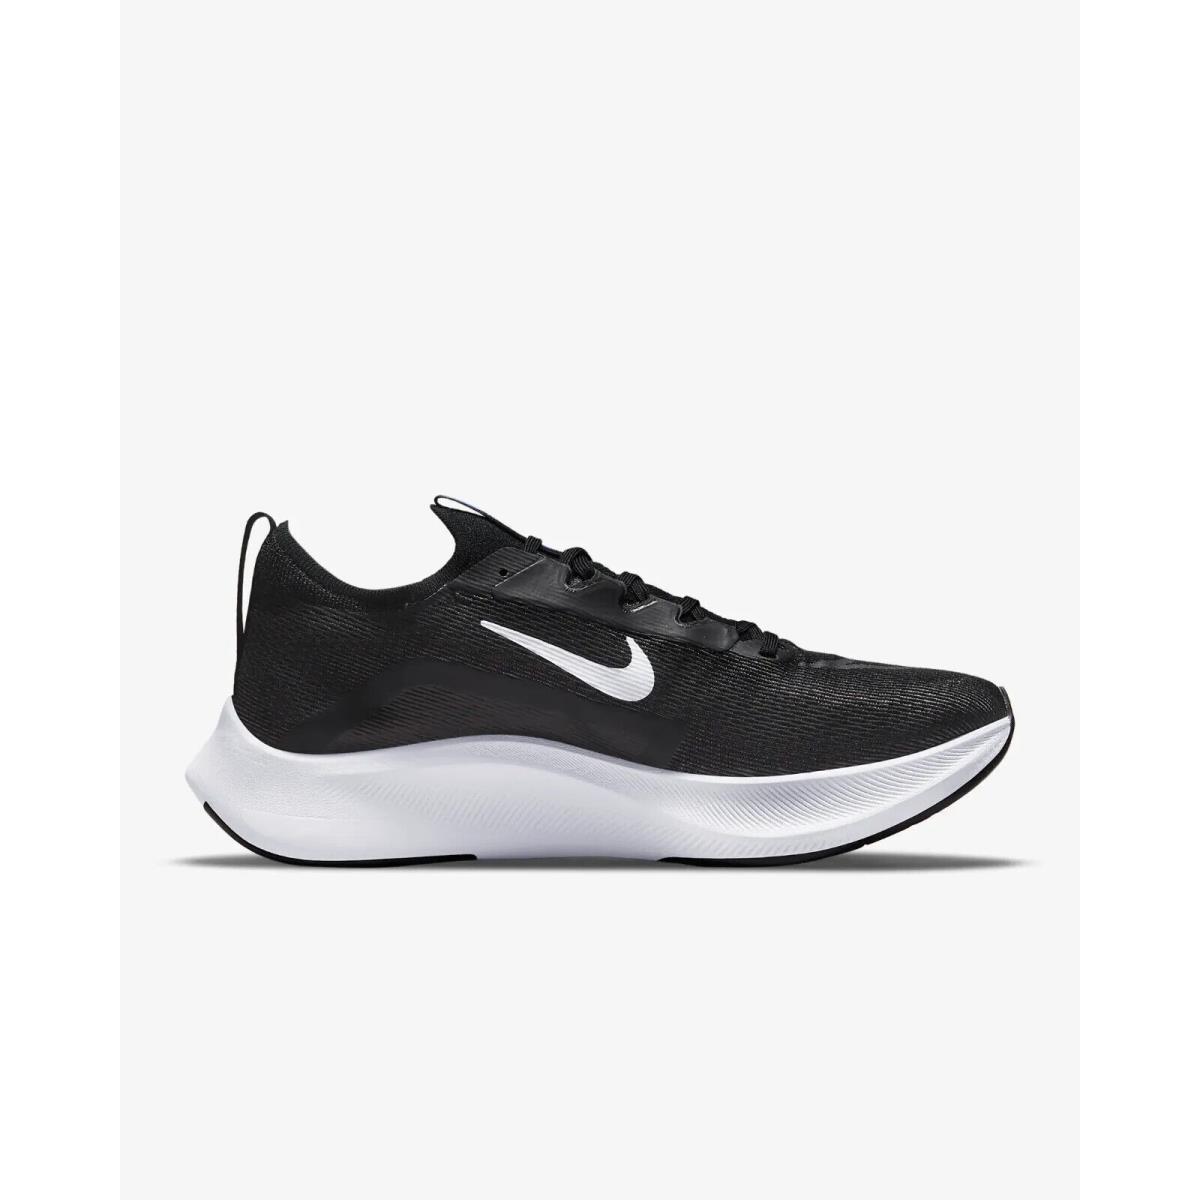 Nike shoes Zoom Fly - Black 1